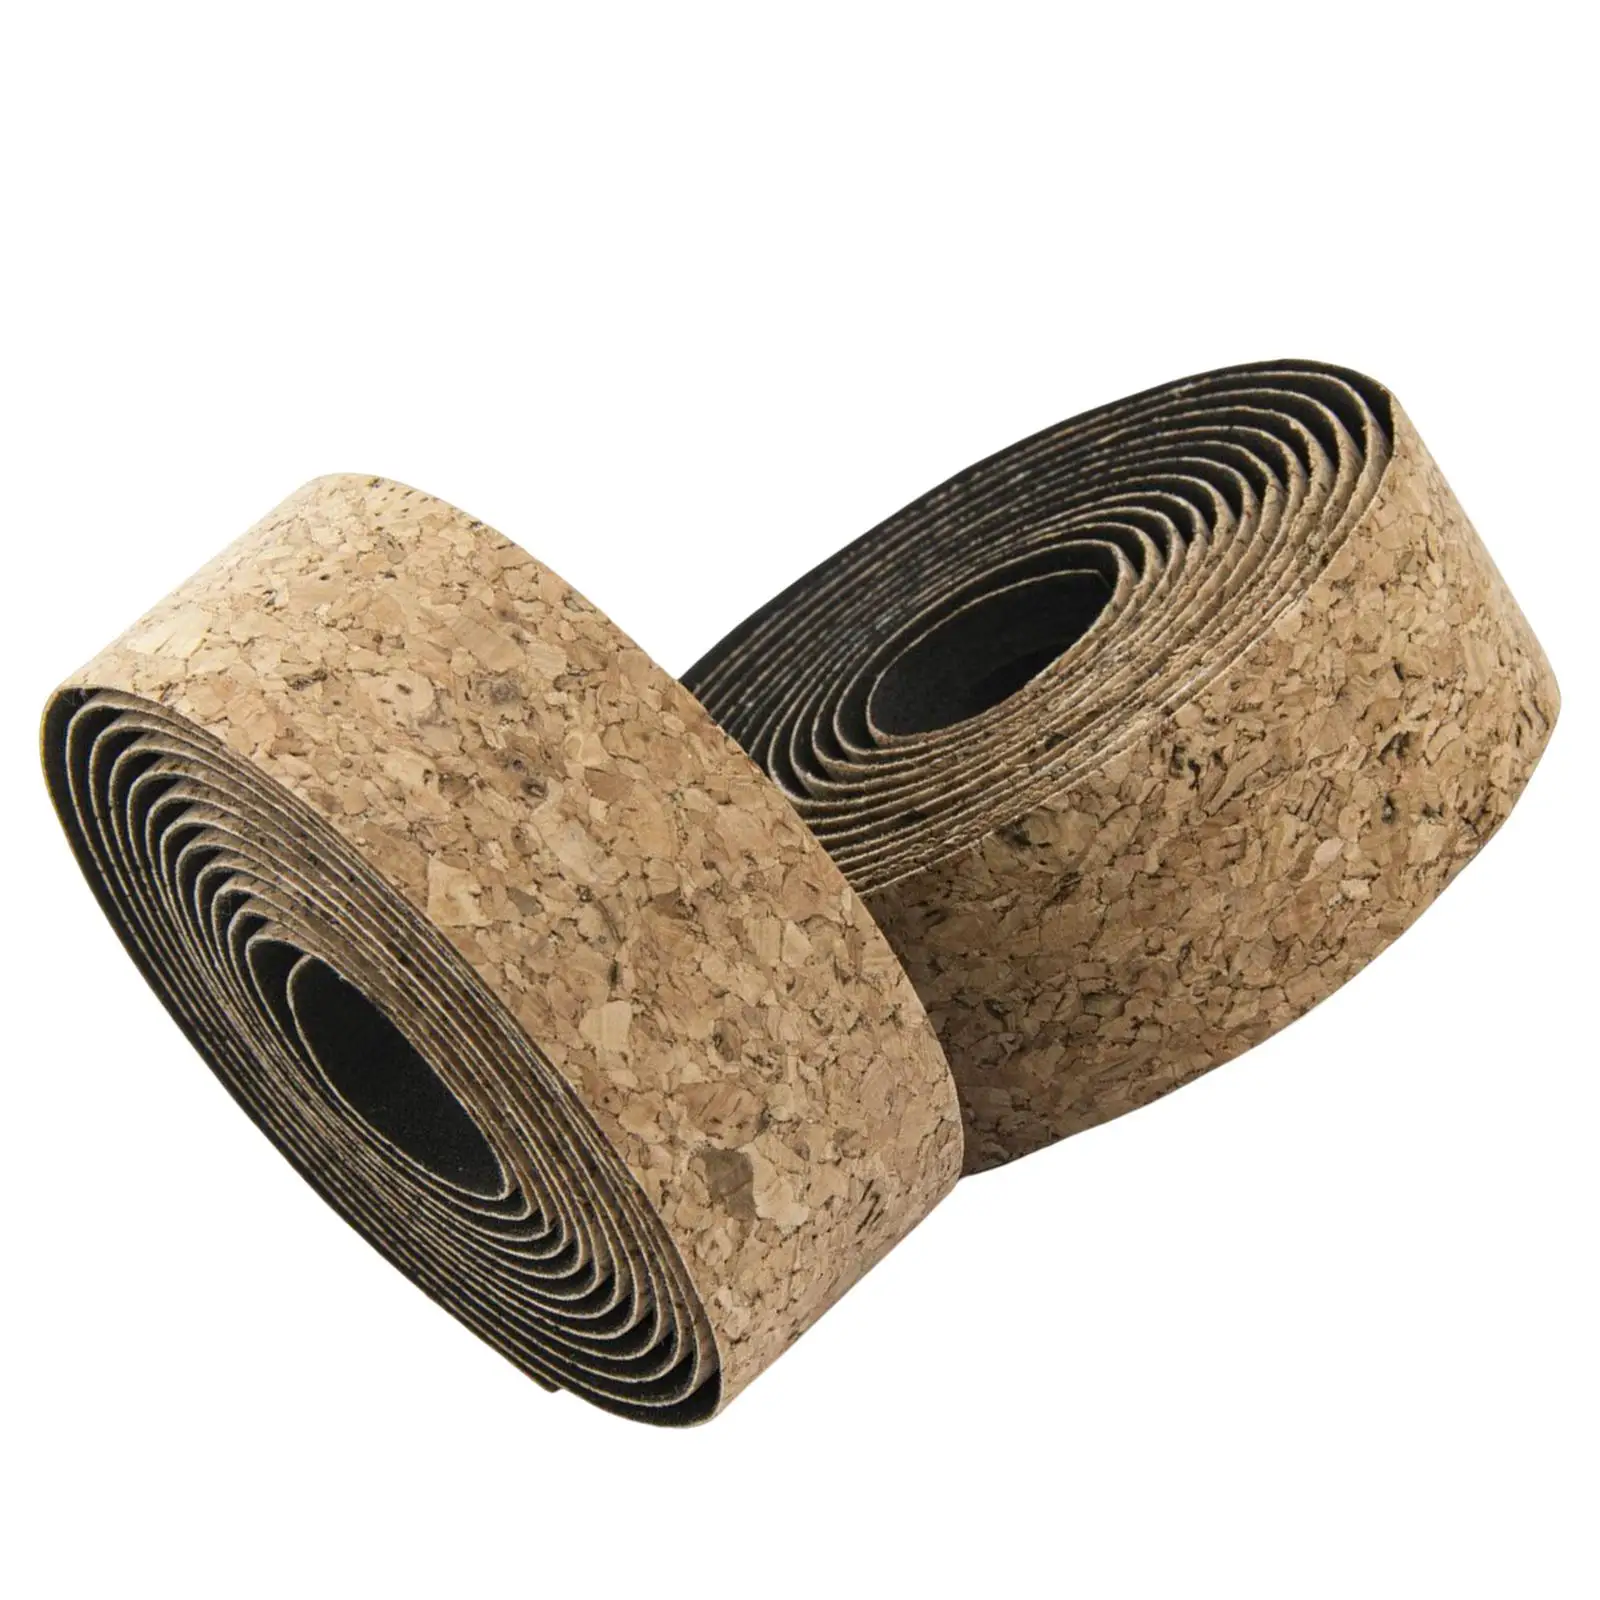 Bicycle Bar Tape Adhesive Back with Bar Plugs Cork Tape Wood Chips Texture Non